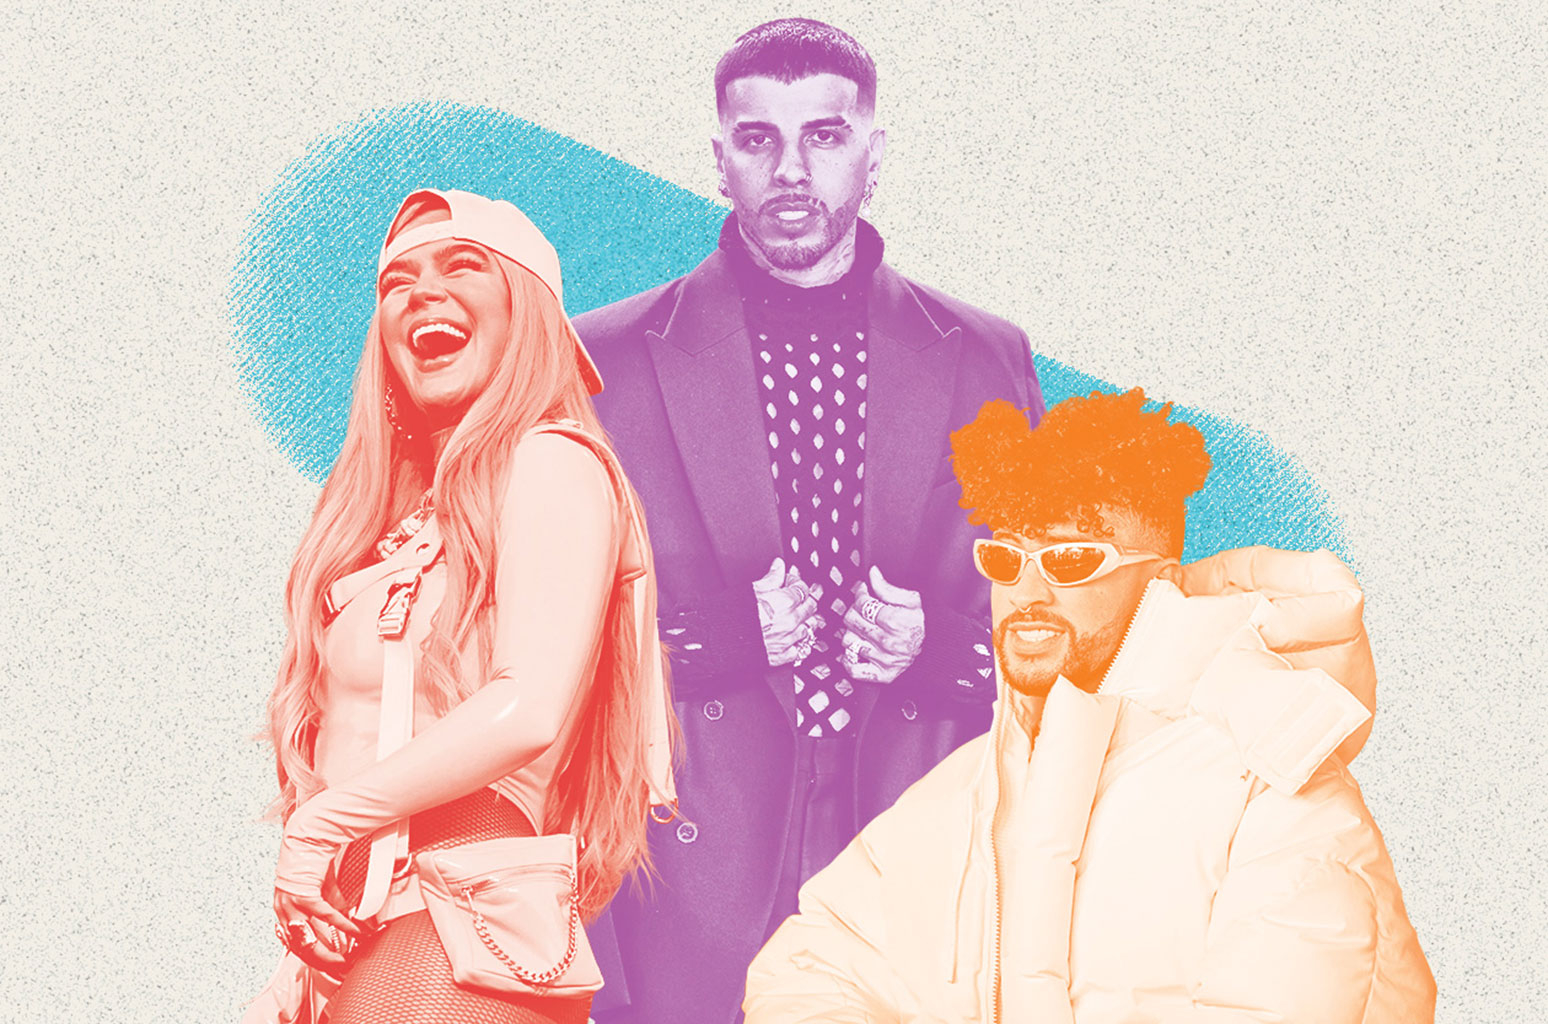 The Year in Charts Here Are the Top 10 Latin Artists of 2021